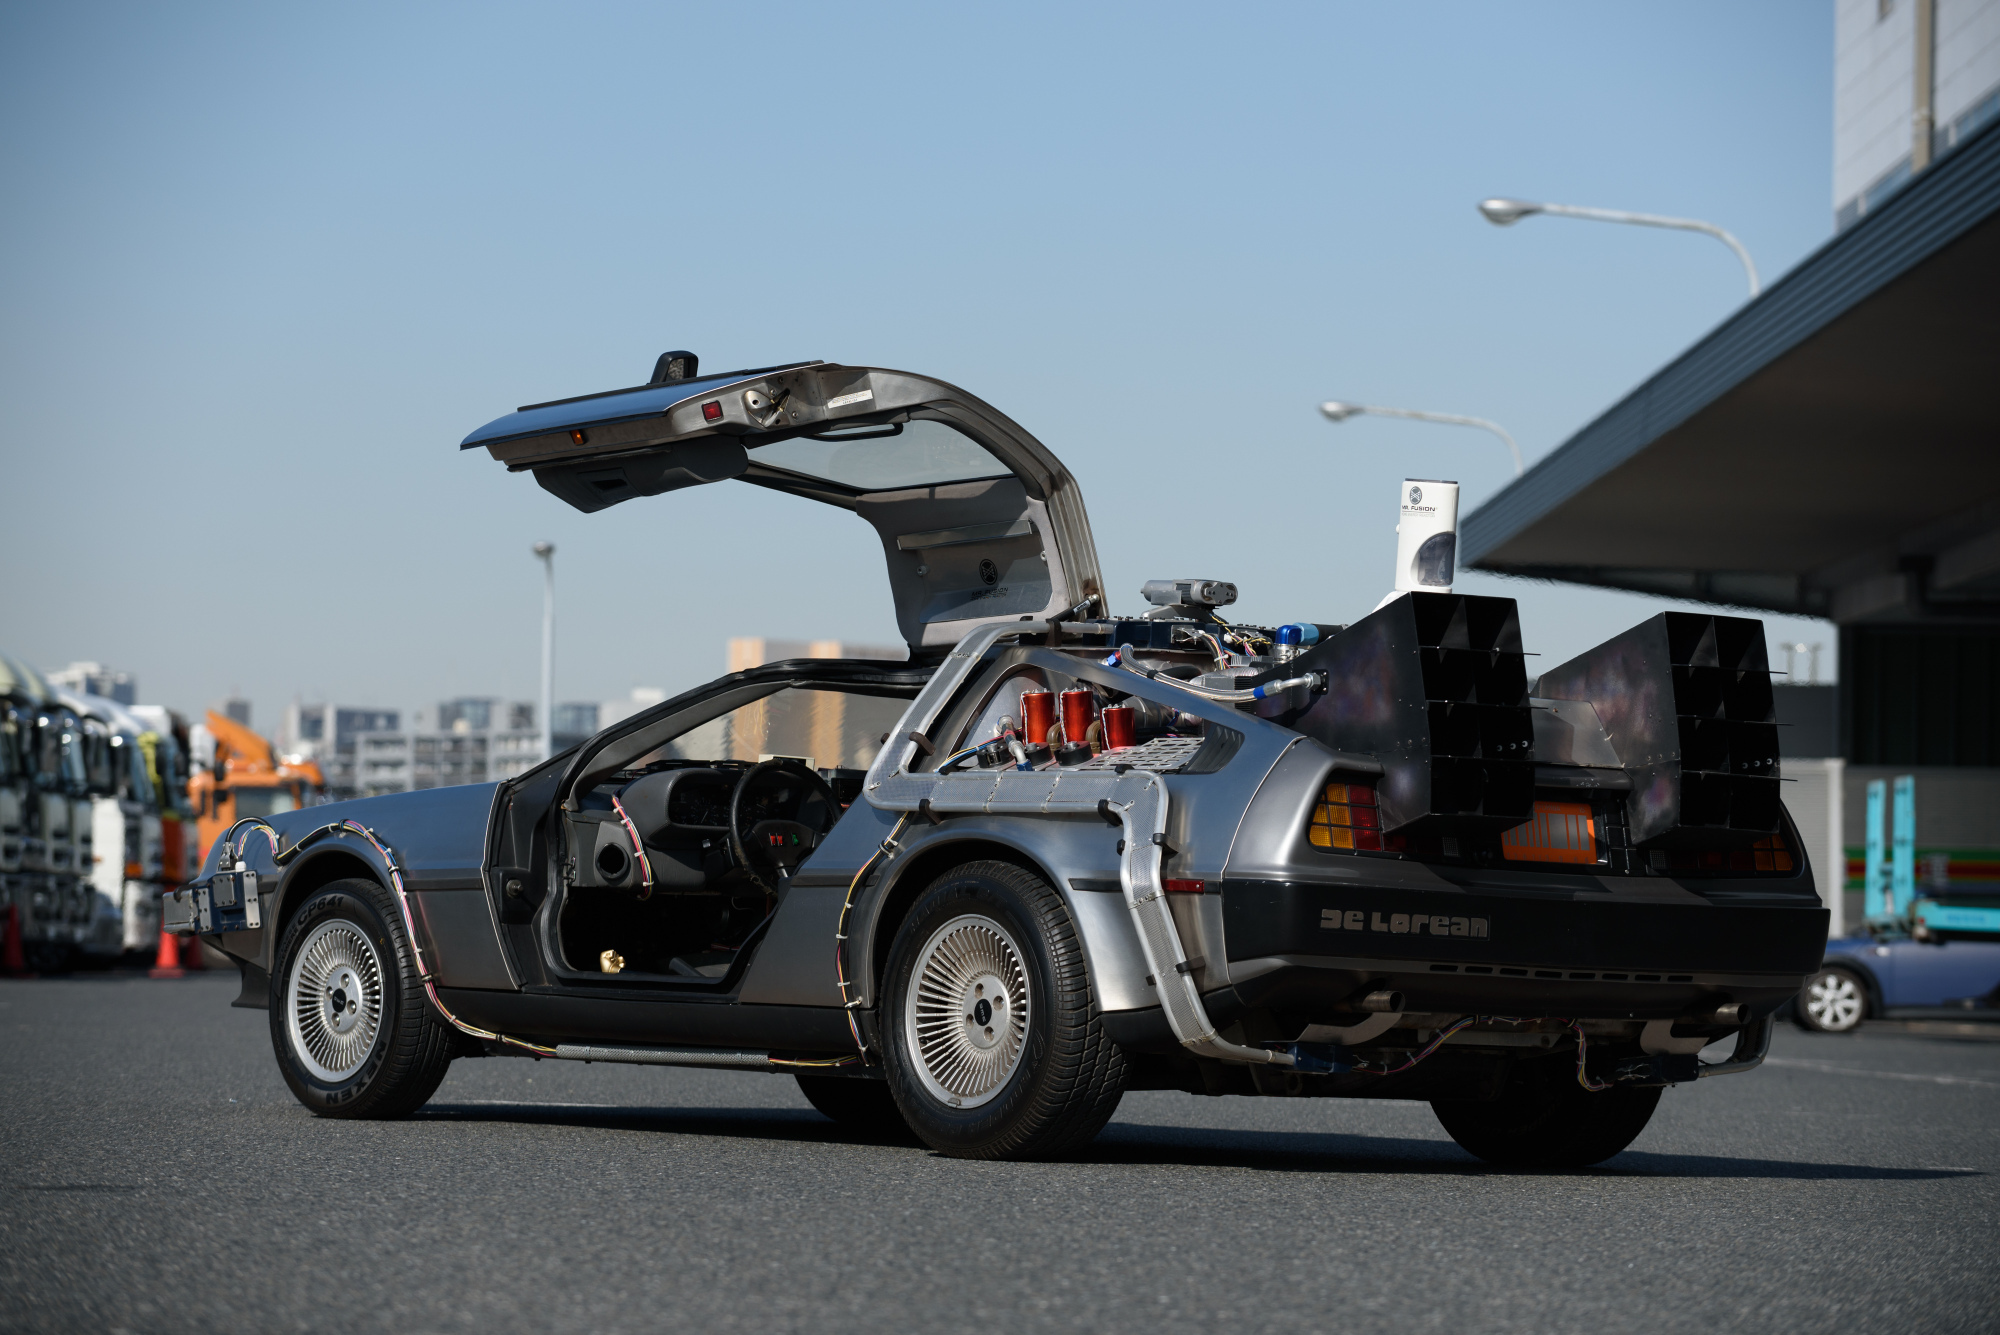 The Alpha5 Is Bringing the DeLorean Back to the Future